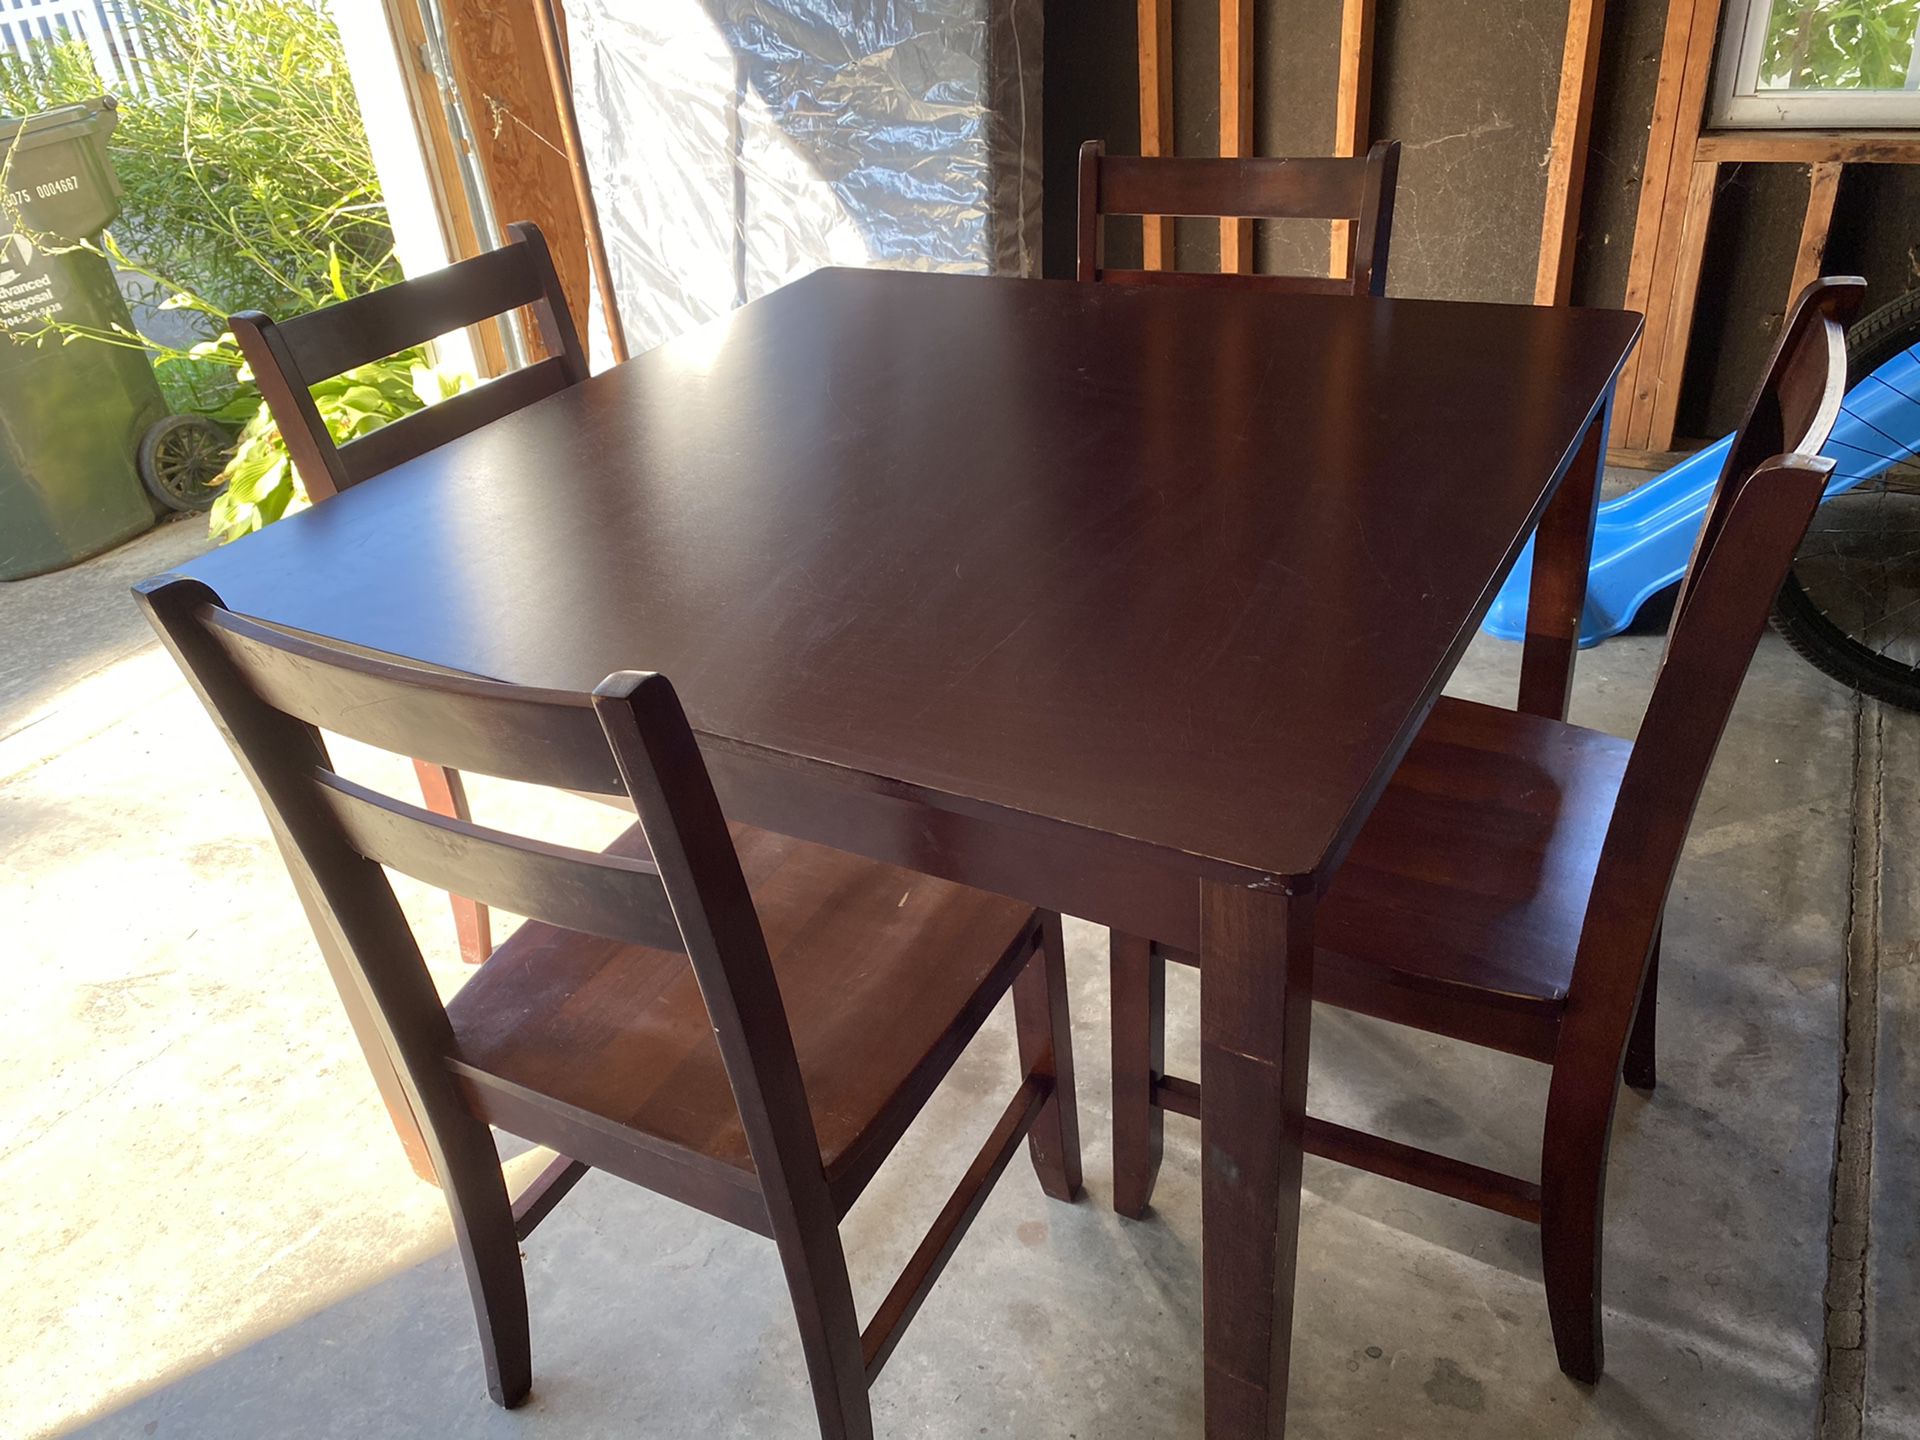 42” Square Table with Chairs - MUST SELL!